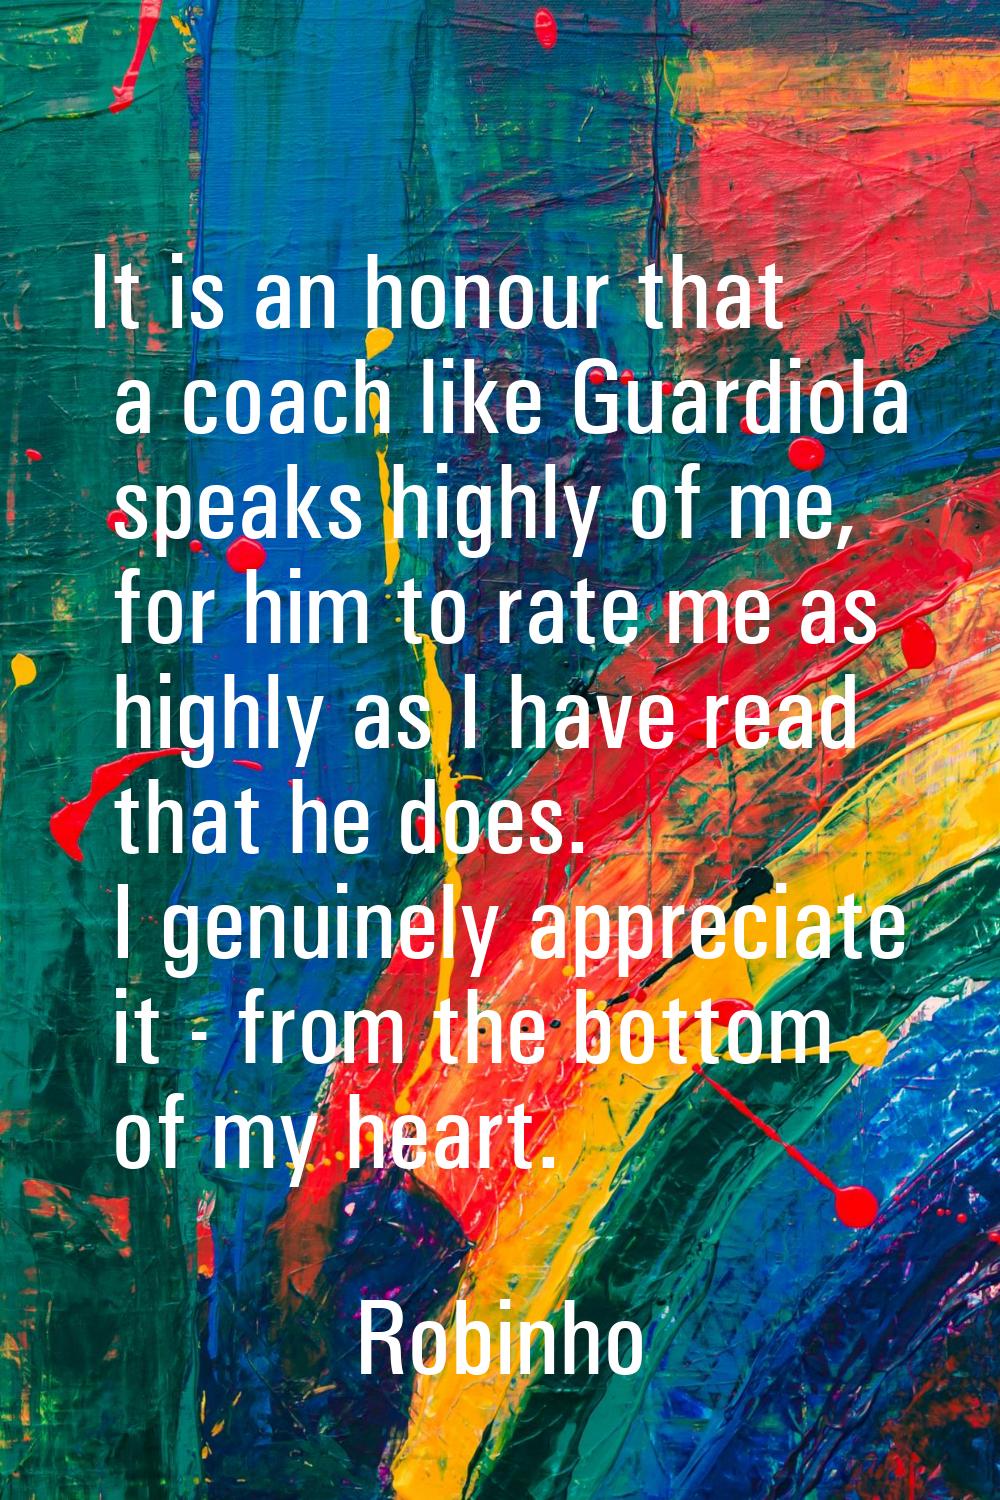 It is an honour that a coach like Guardiola speaks highly of me, for him to rate me as highly as I 